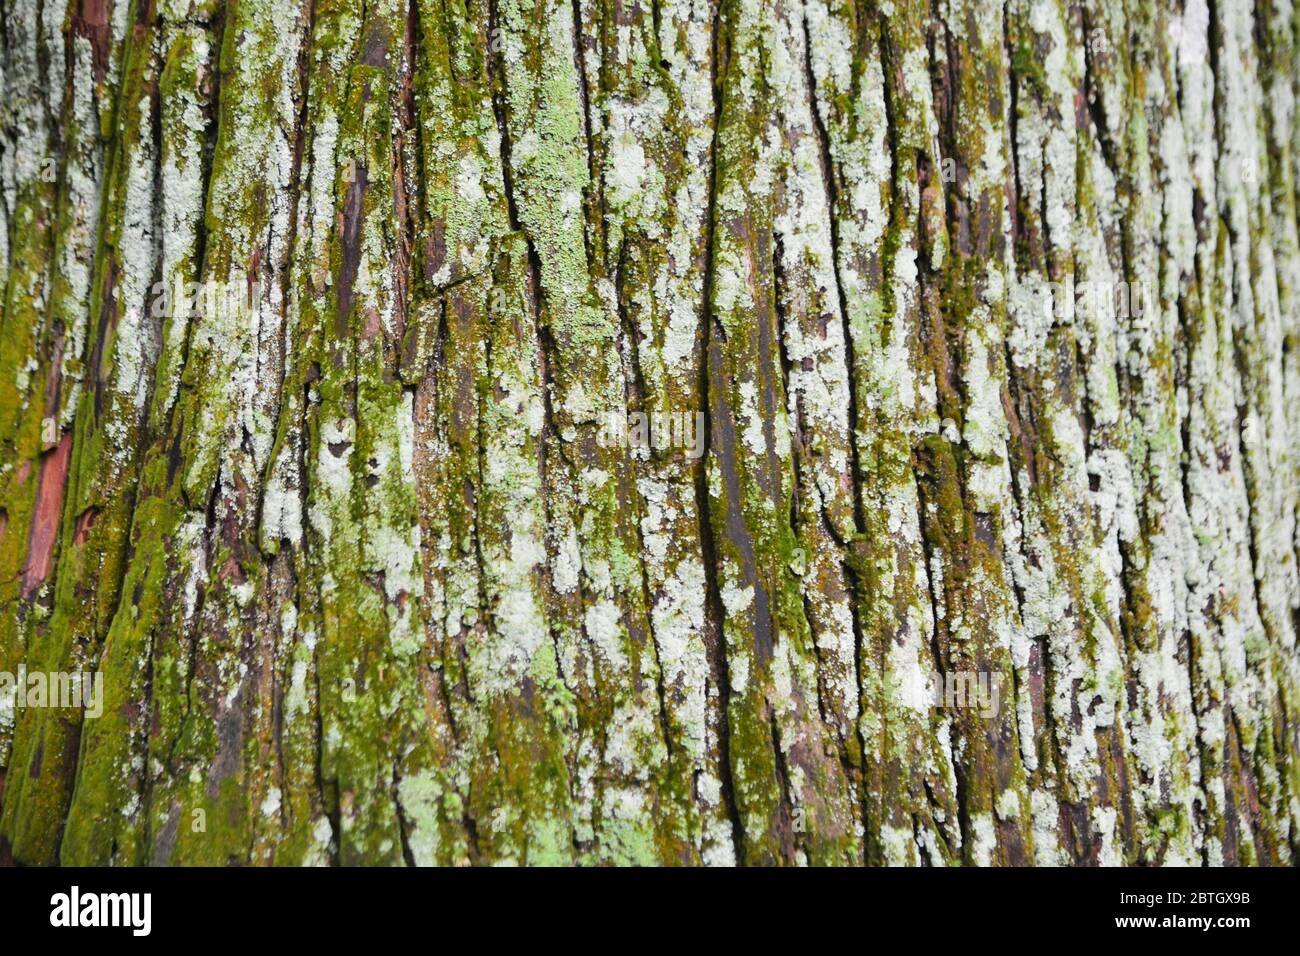 lichen is a composite organism that arises from algae or cyanobacteria living among filaments of multiple fungi species in a mutualistic relationship. Stock Photo